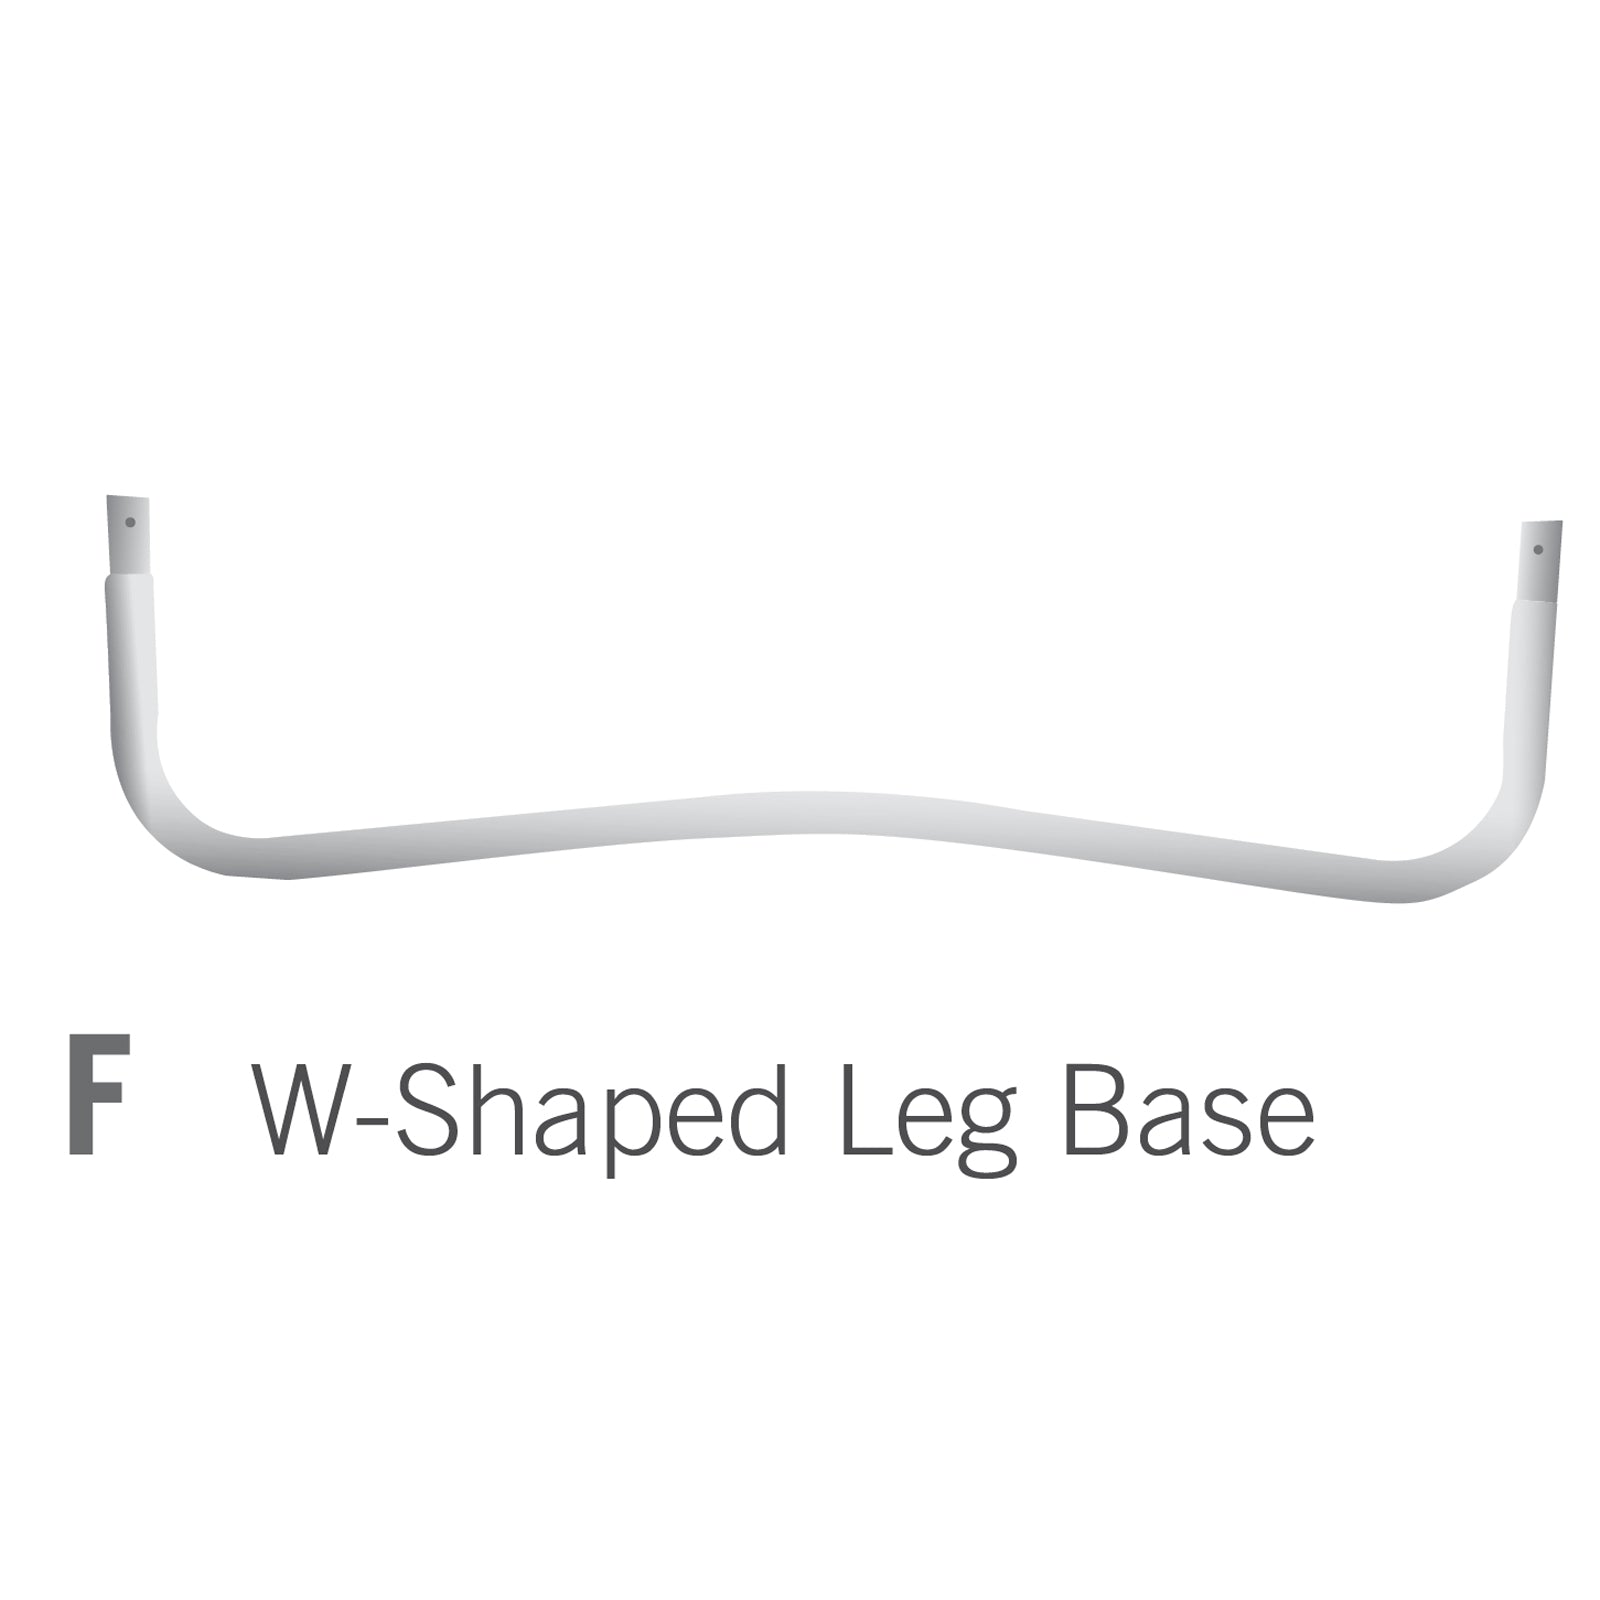 W-Leg Base for 11x16 foot Orion Trampoline (Part F).